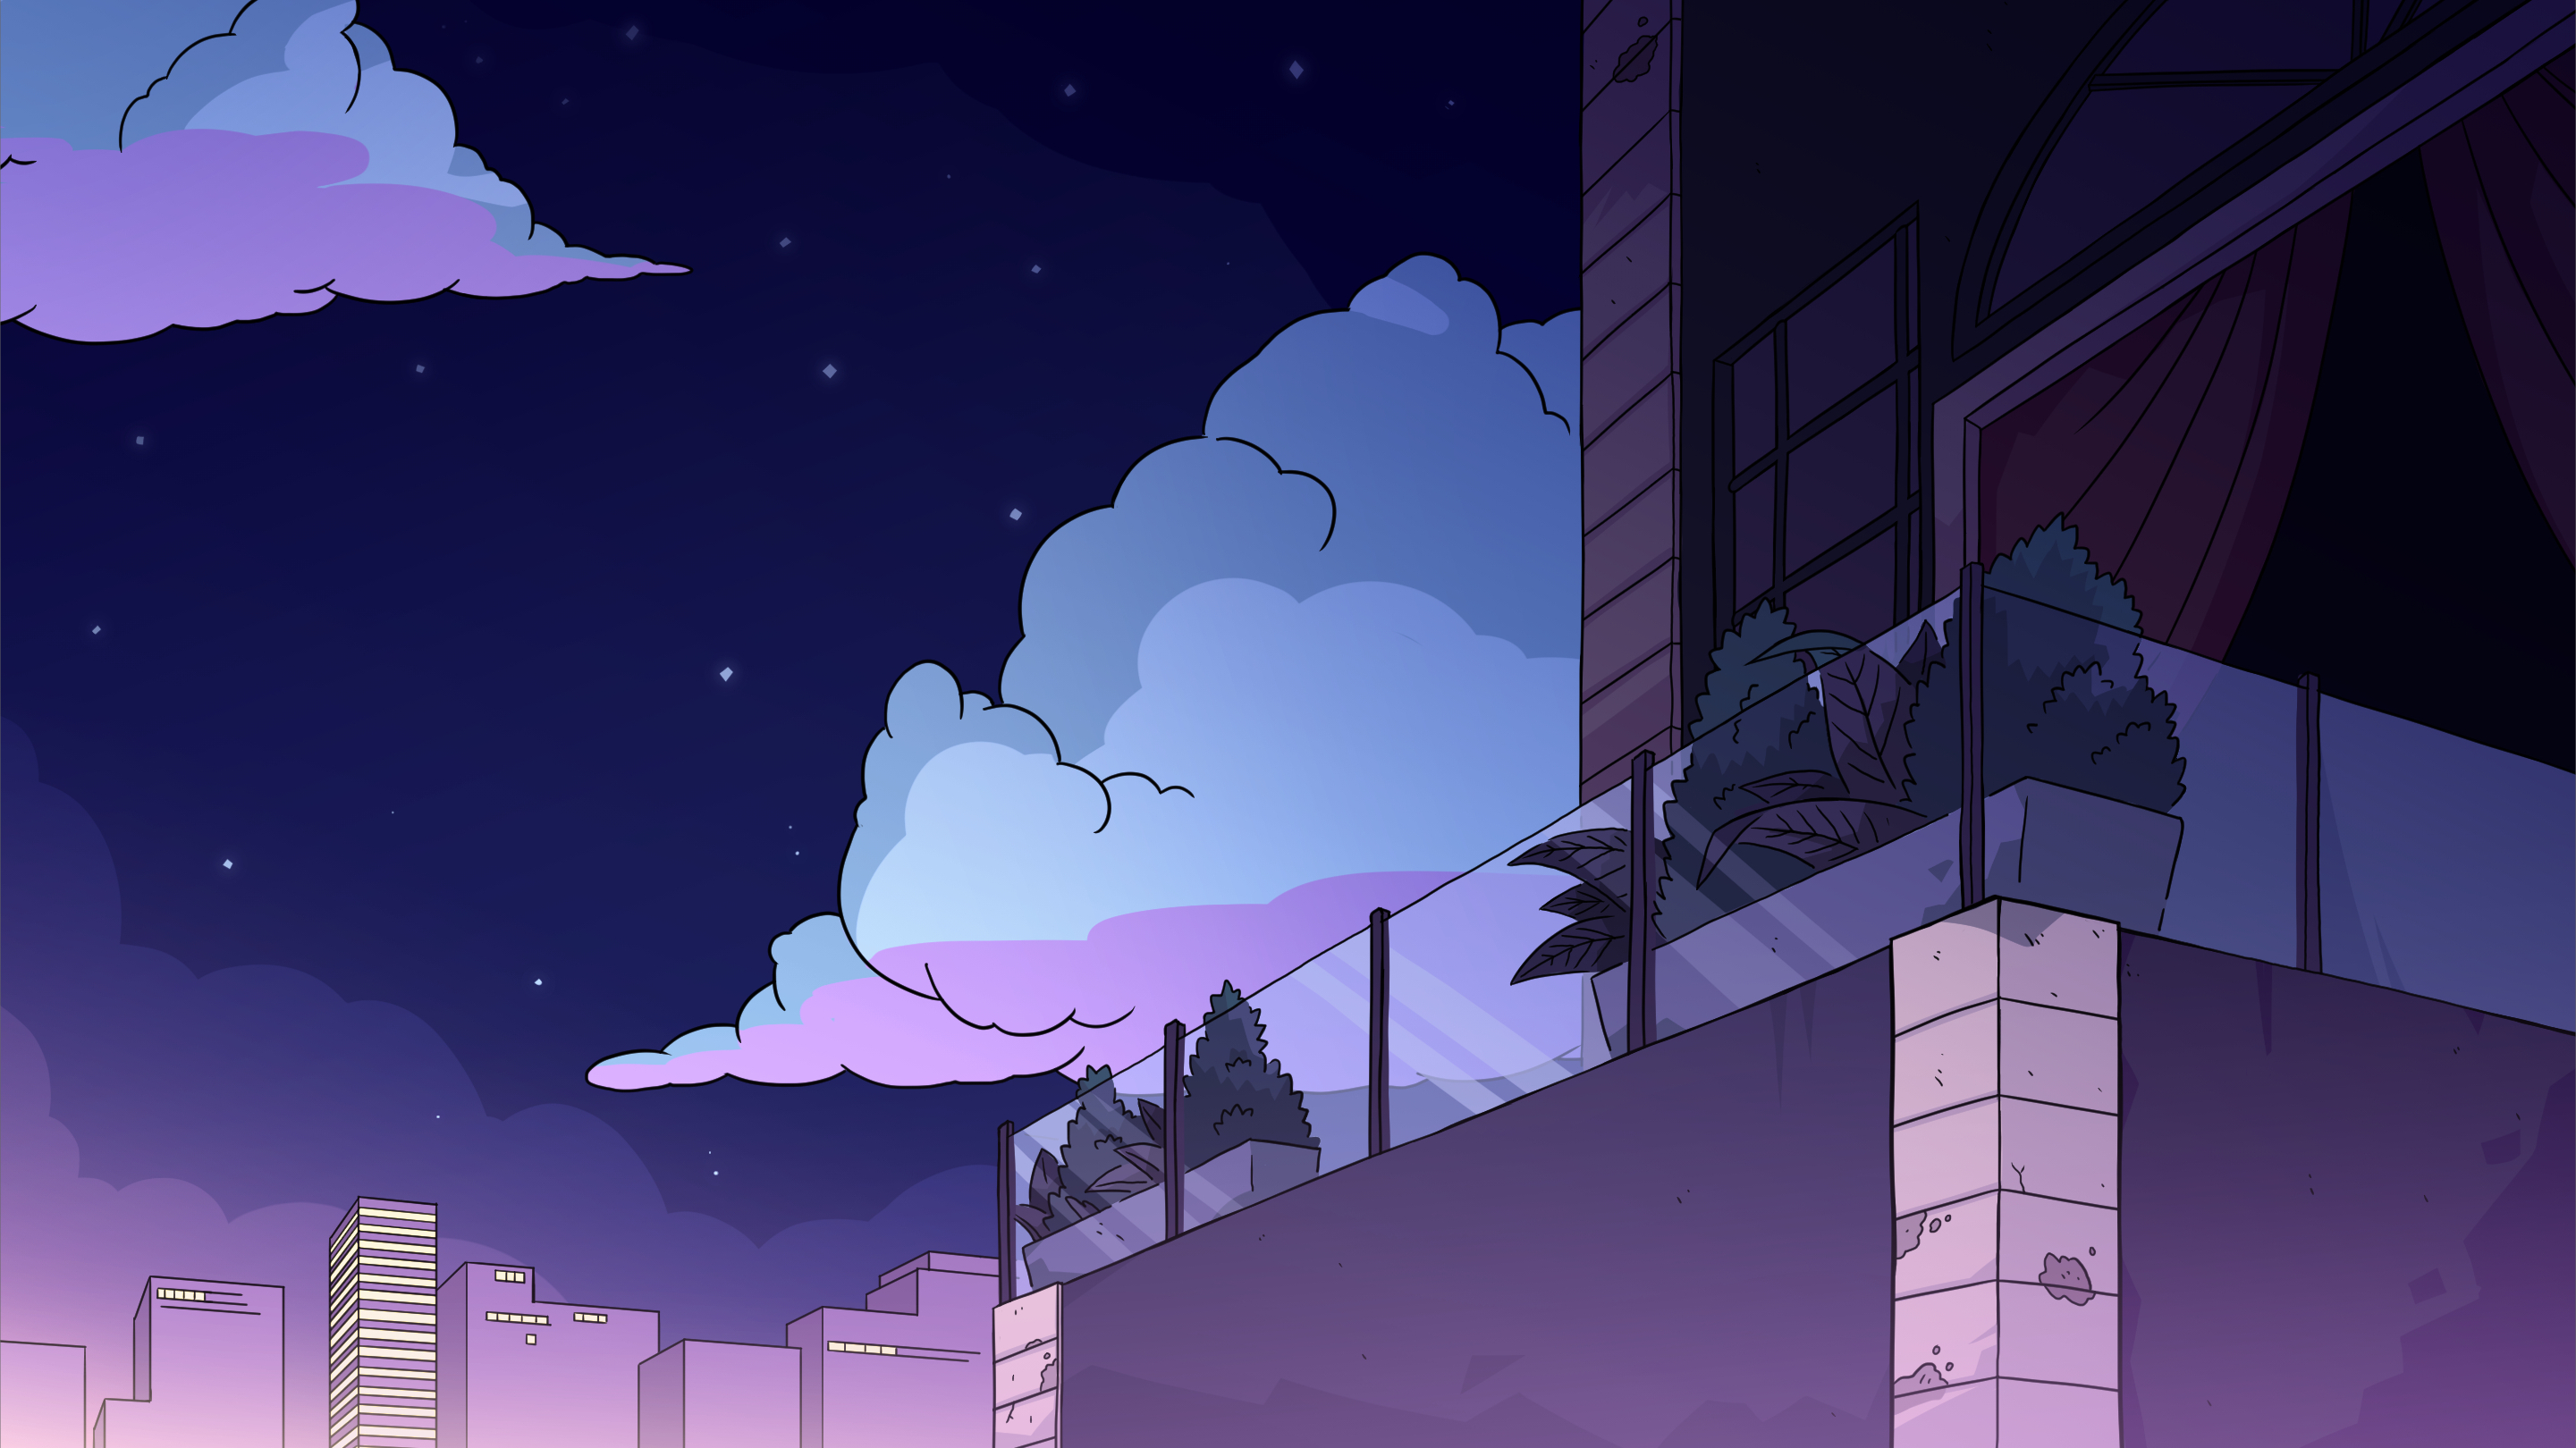 A balcony overlooks a city at night, with pink and blue clouds in the sky. - Steven Universe